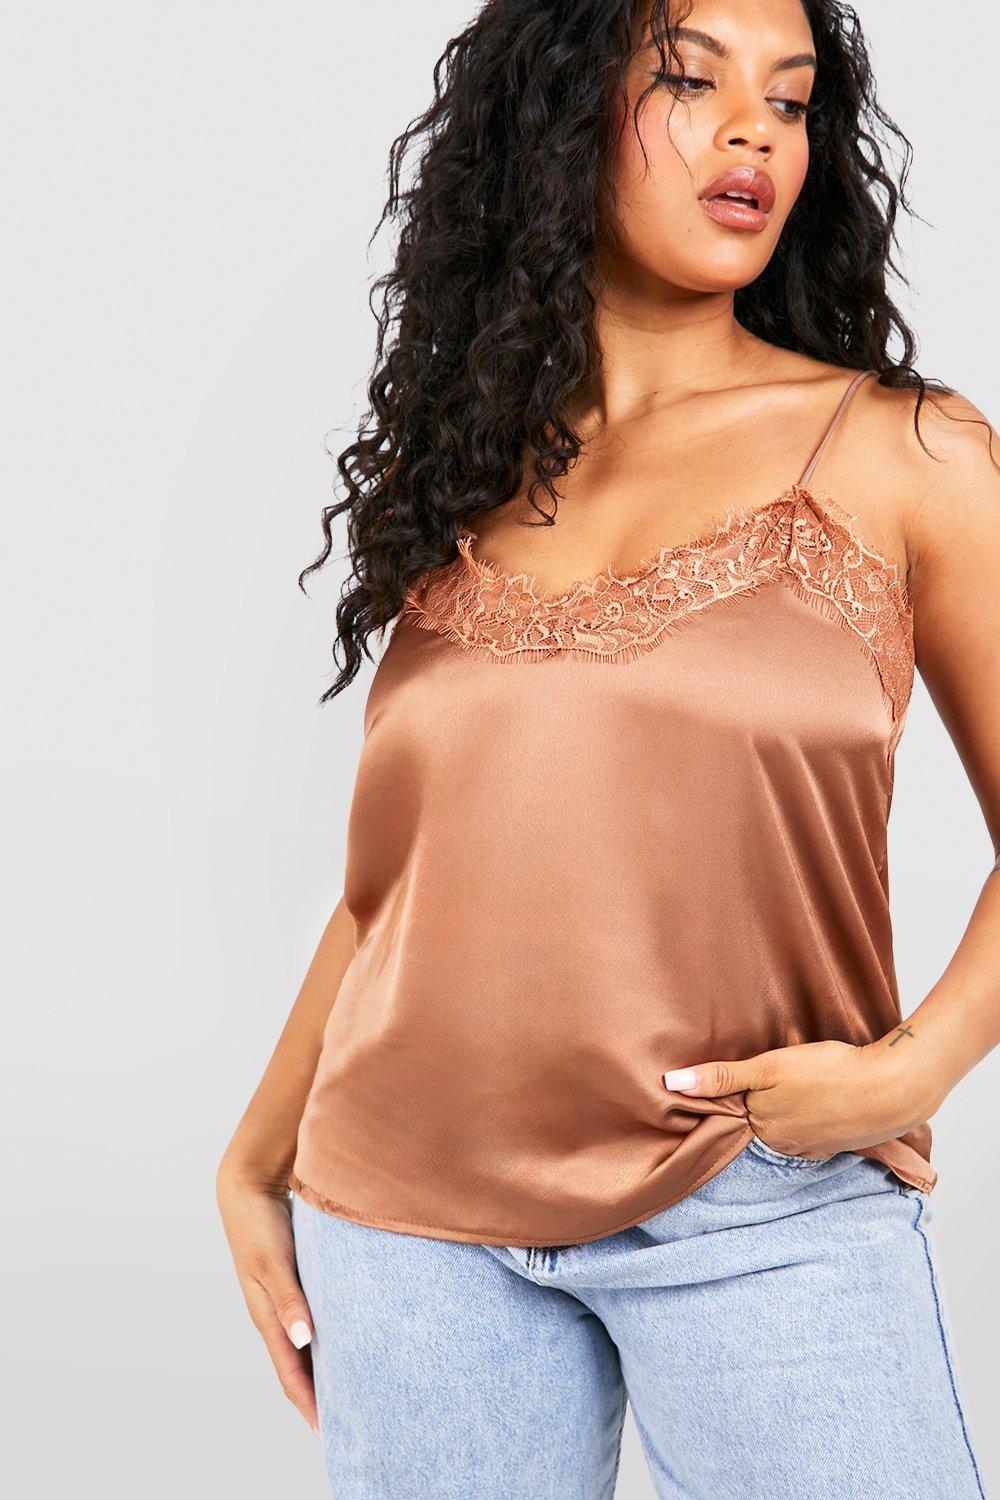 Is That The New Contrast Lace Cami Top ??